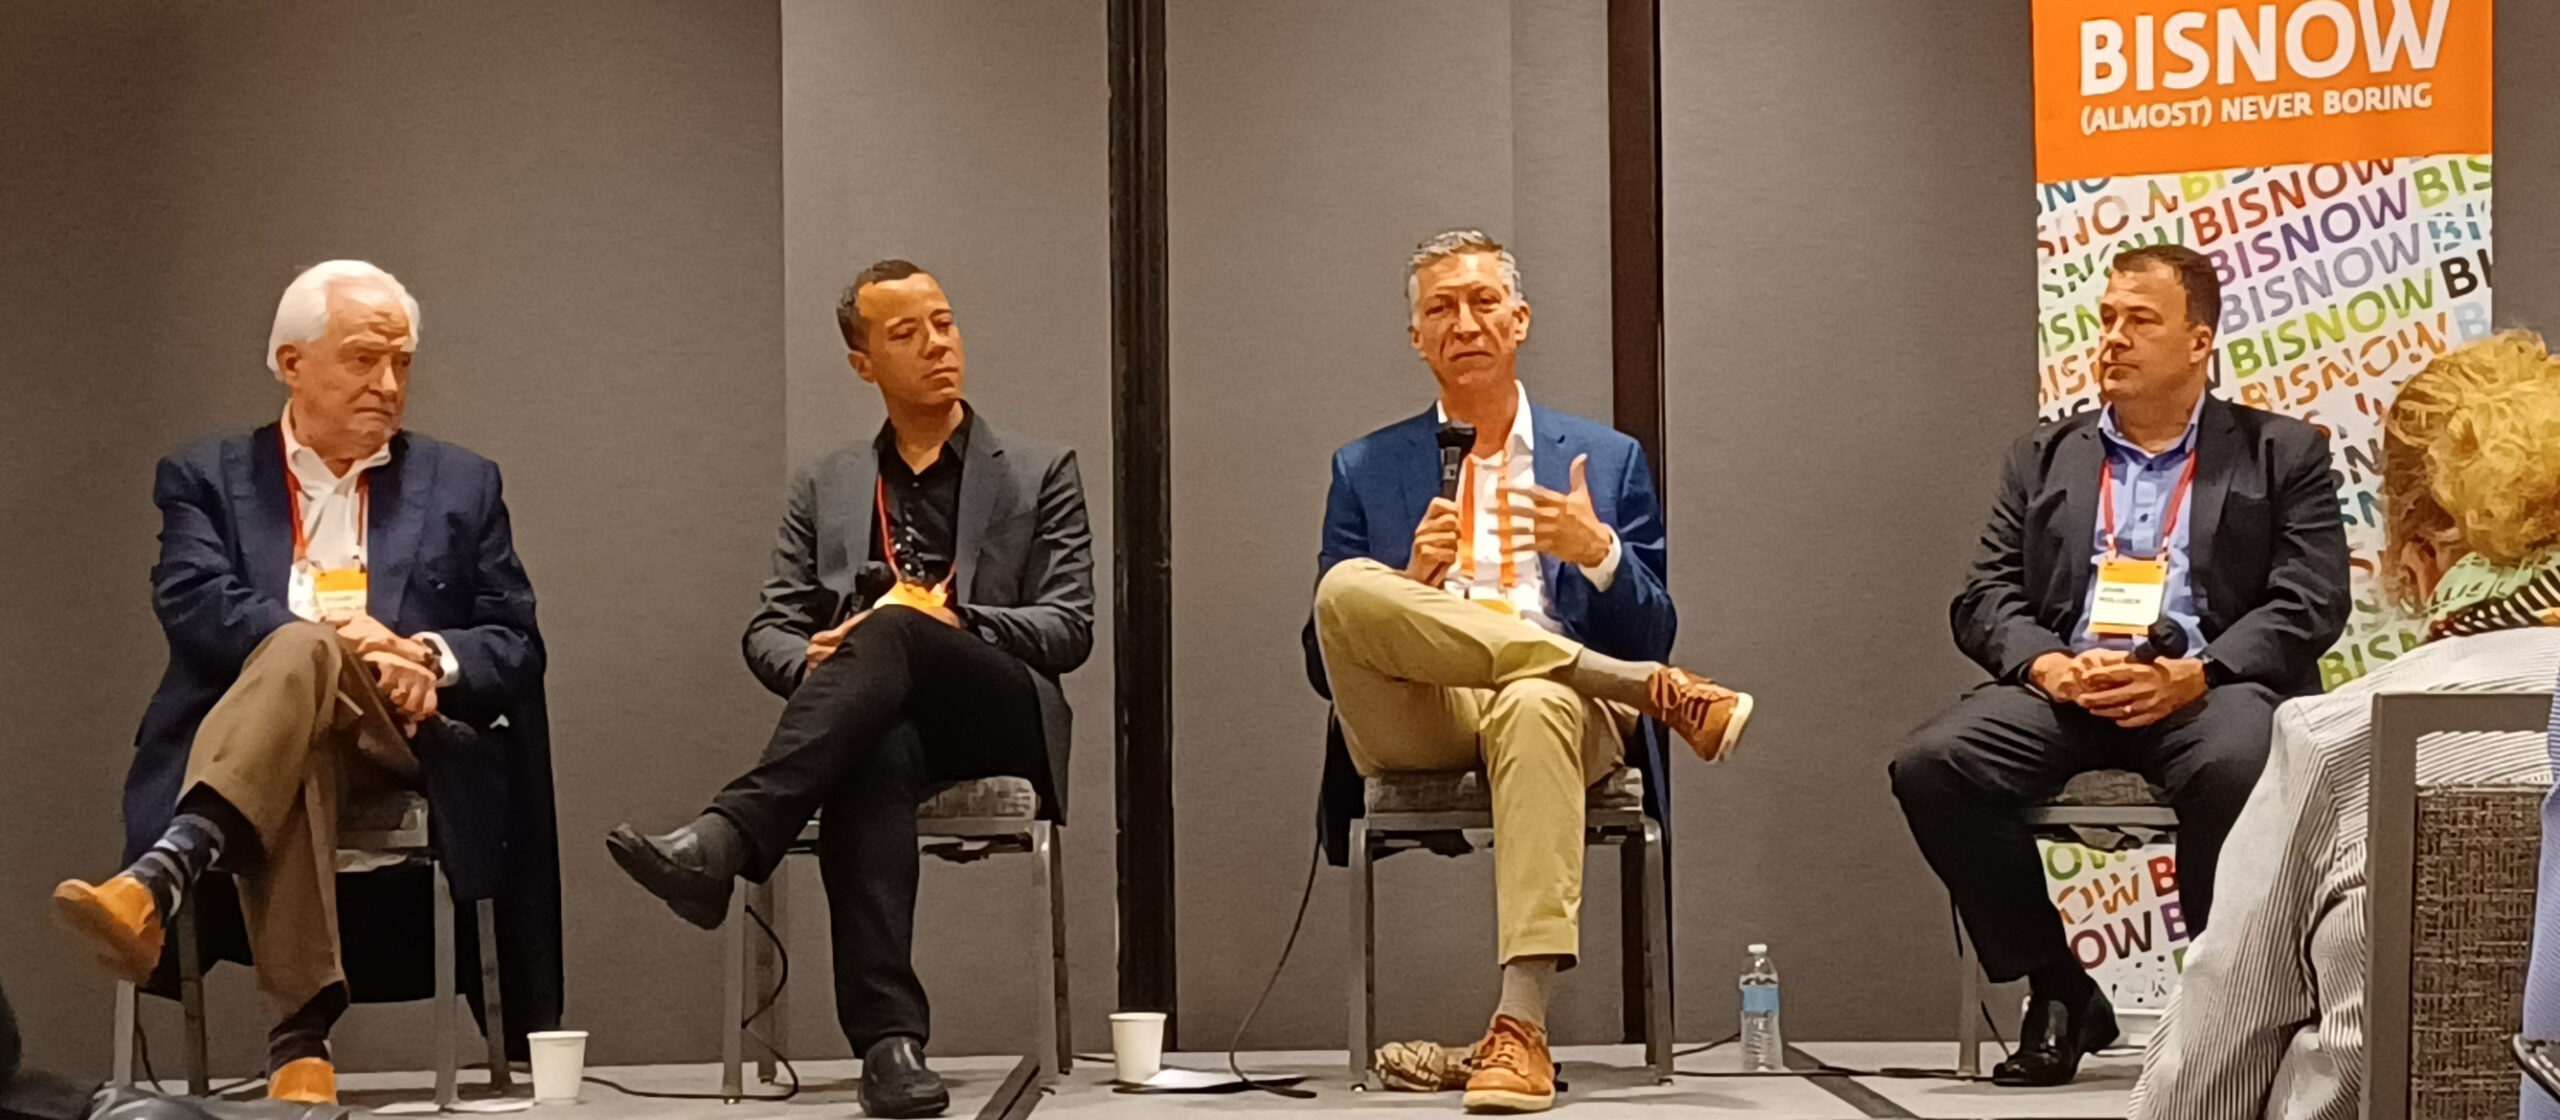 Trask Leonard, CEO of Bayside Realty Partners, participated in a panel discussion at the Bisnow Northern California Healthcare conference in San Francisco